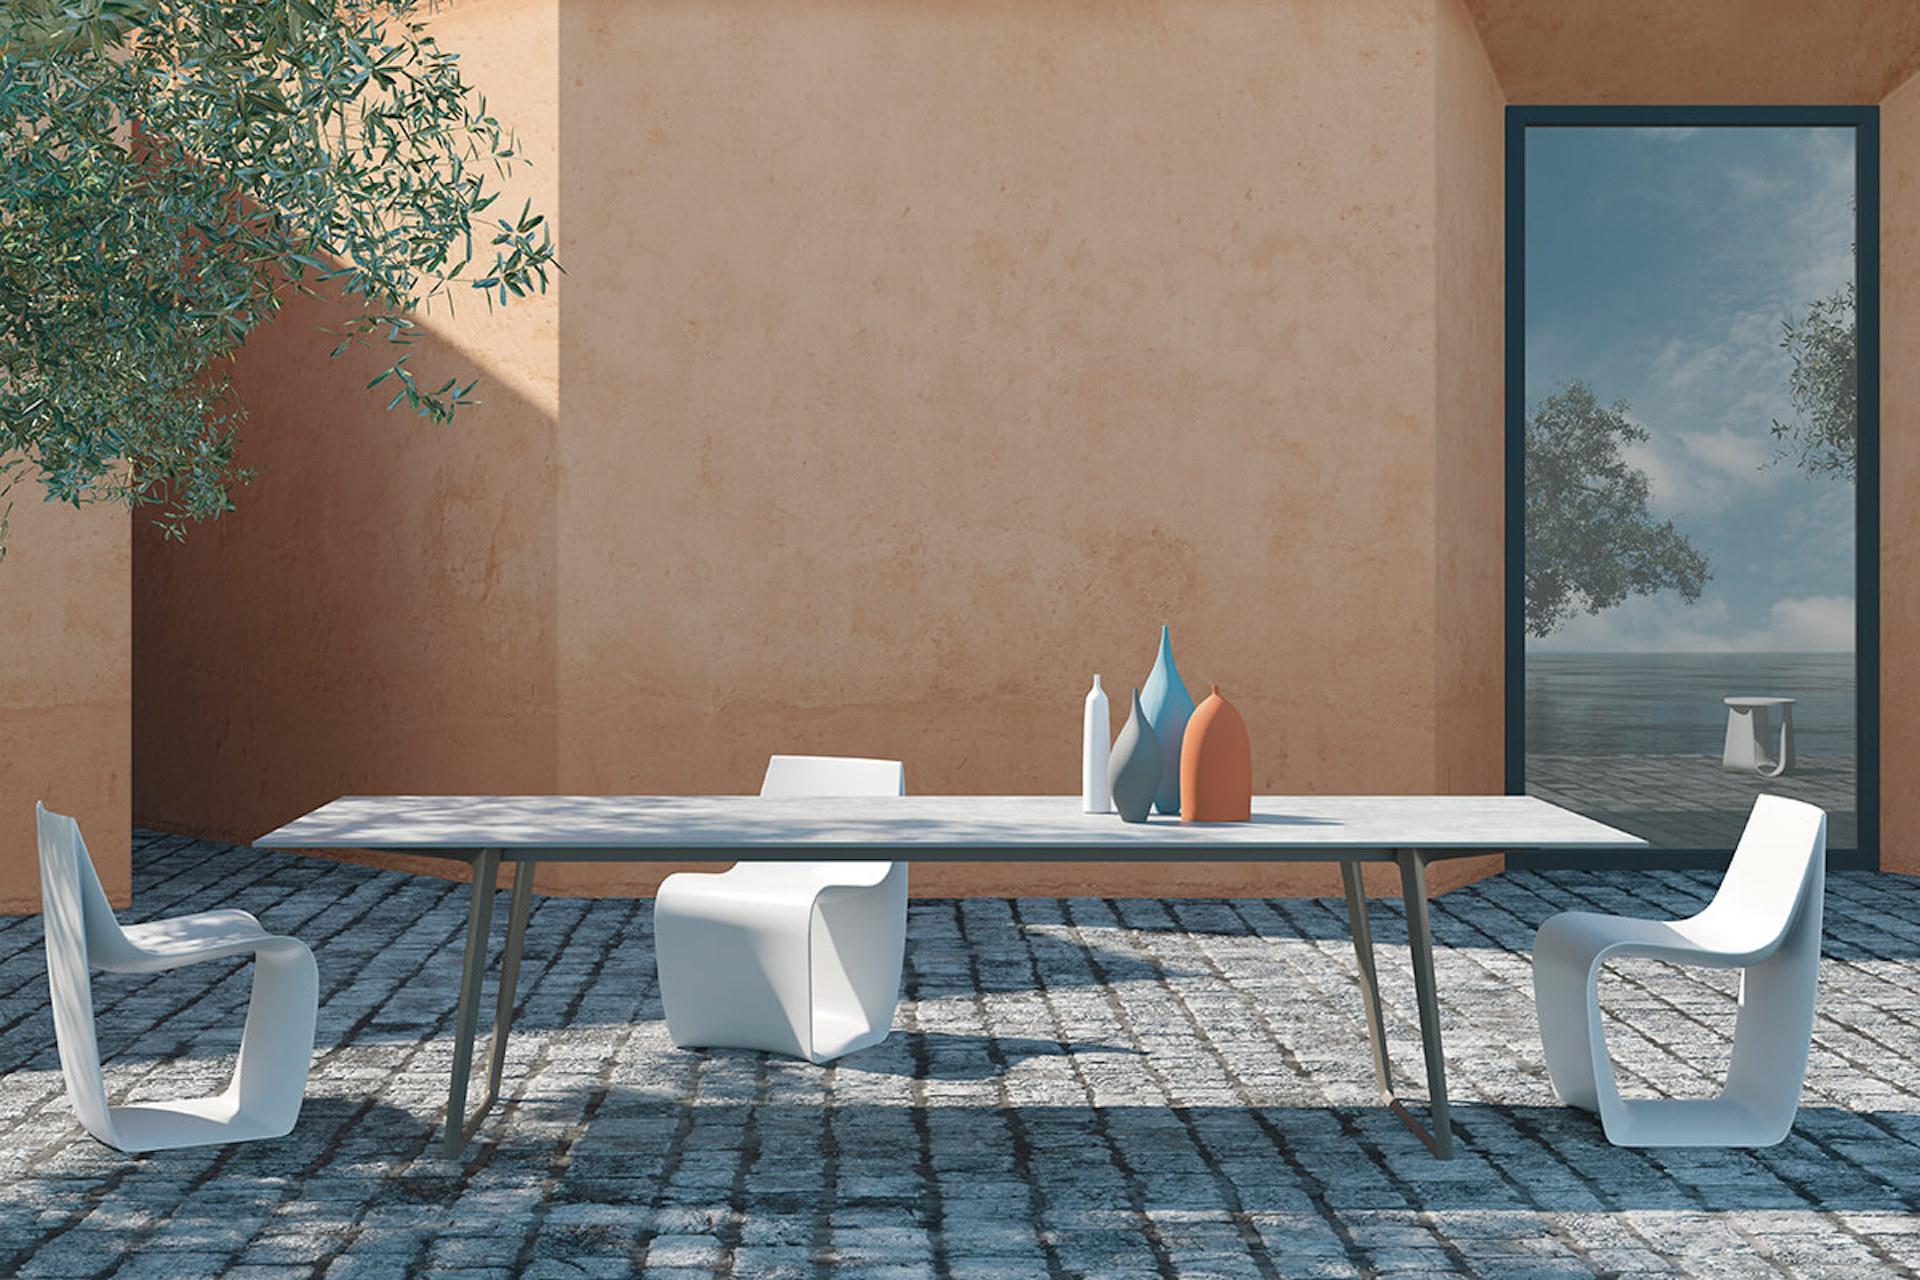 Lightness and dynamism: these two values underline the Axy table system by Claudio Bellini. A suggestive blend of different materials: the aluminium supporting frame is paired with a thin ceramic top in the finishes Pietra di Savoia, Black Calce and